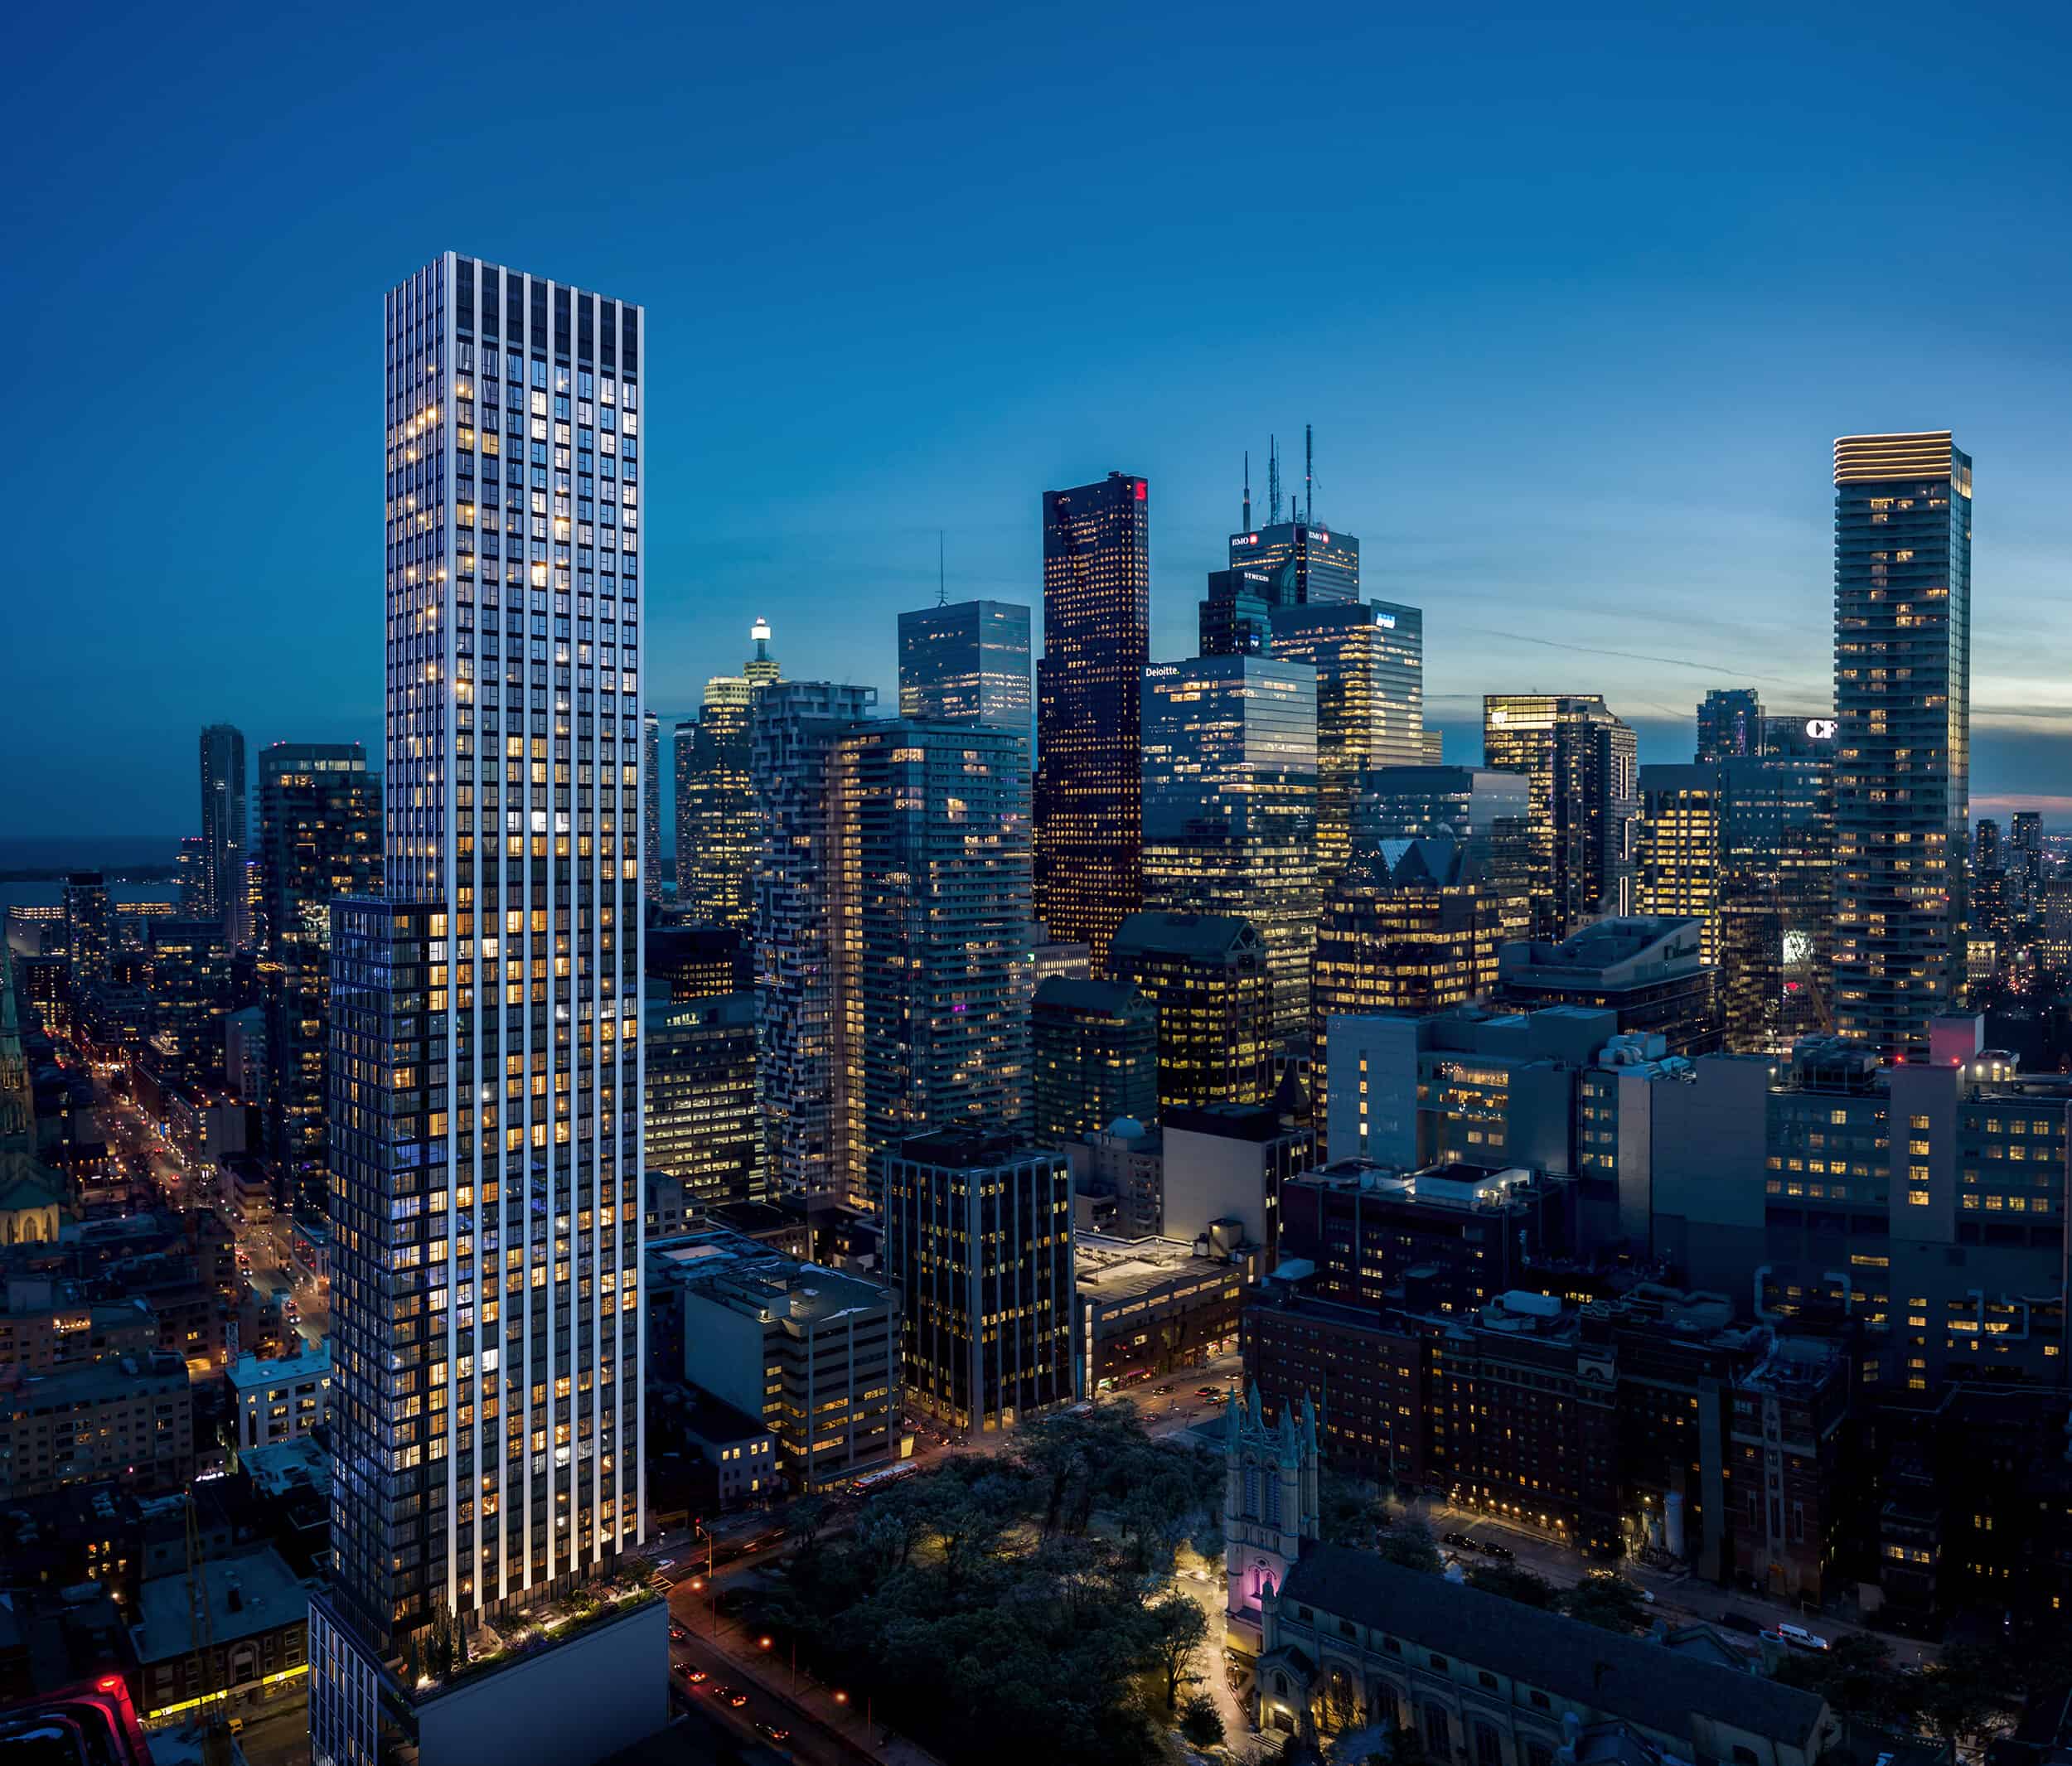 Queen church condos by Bazis and Tridel in Toronto